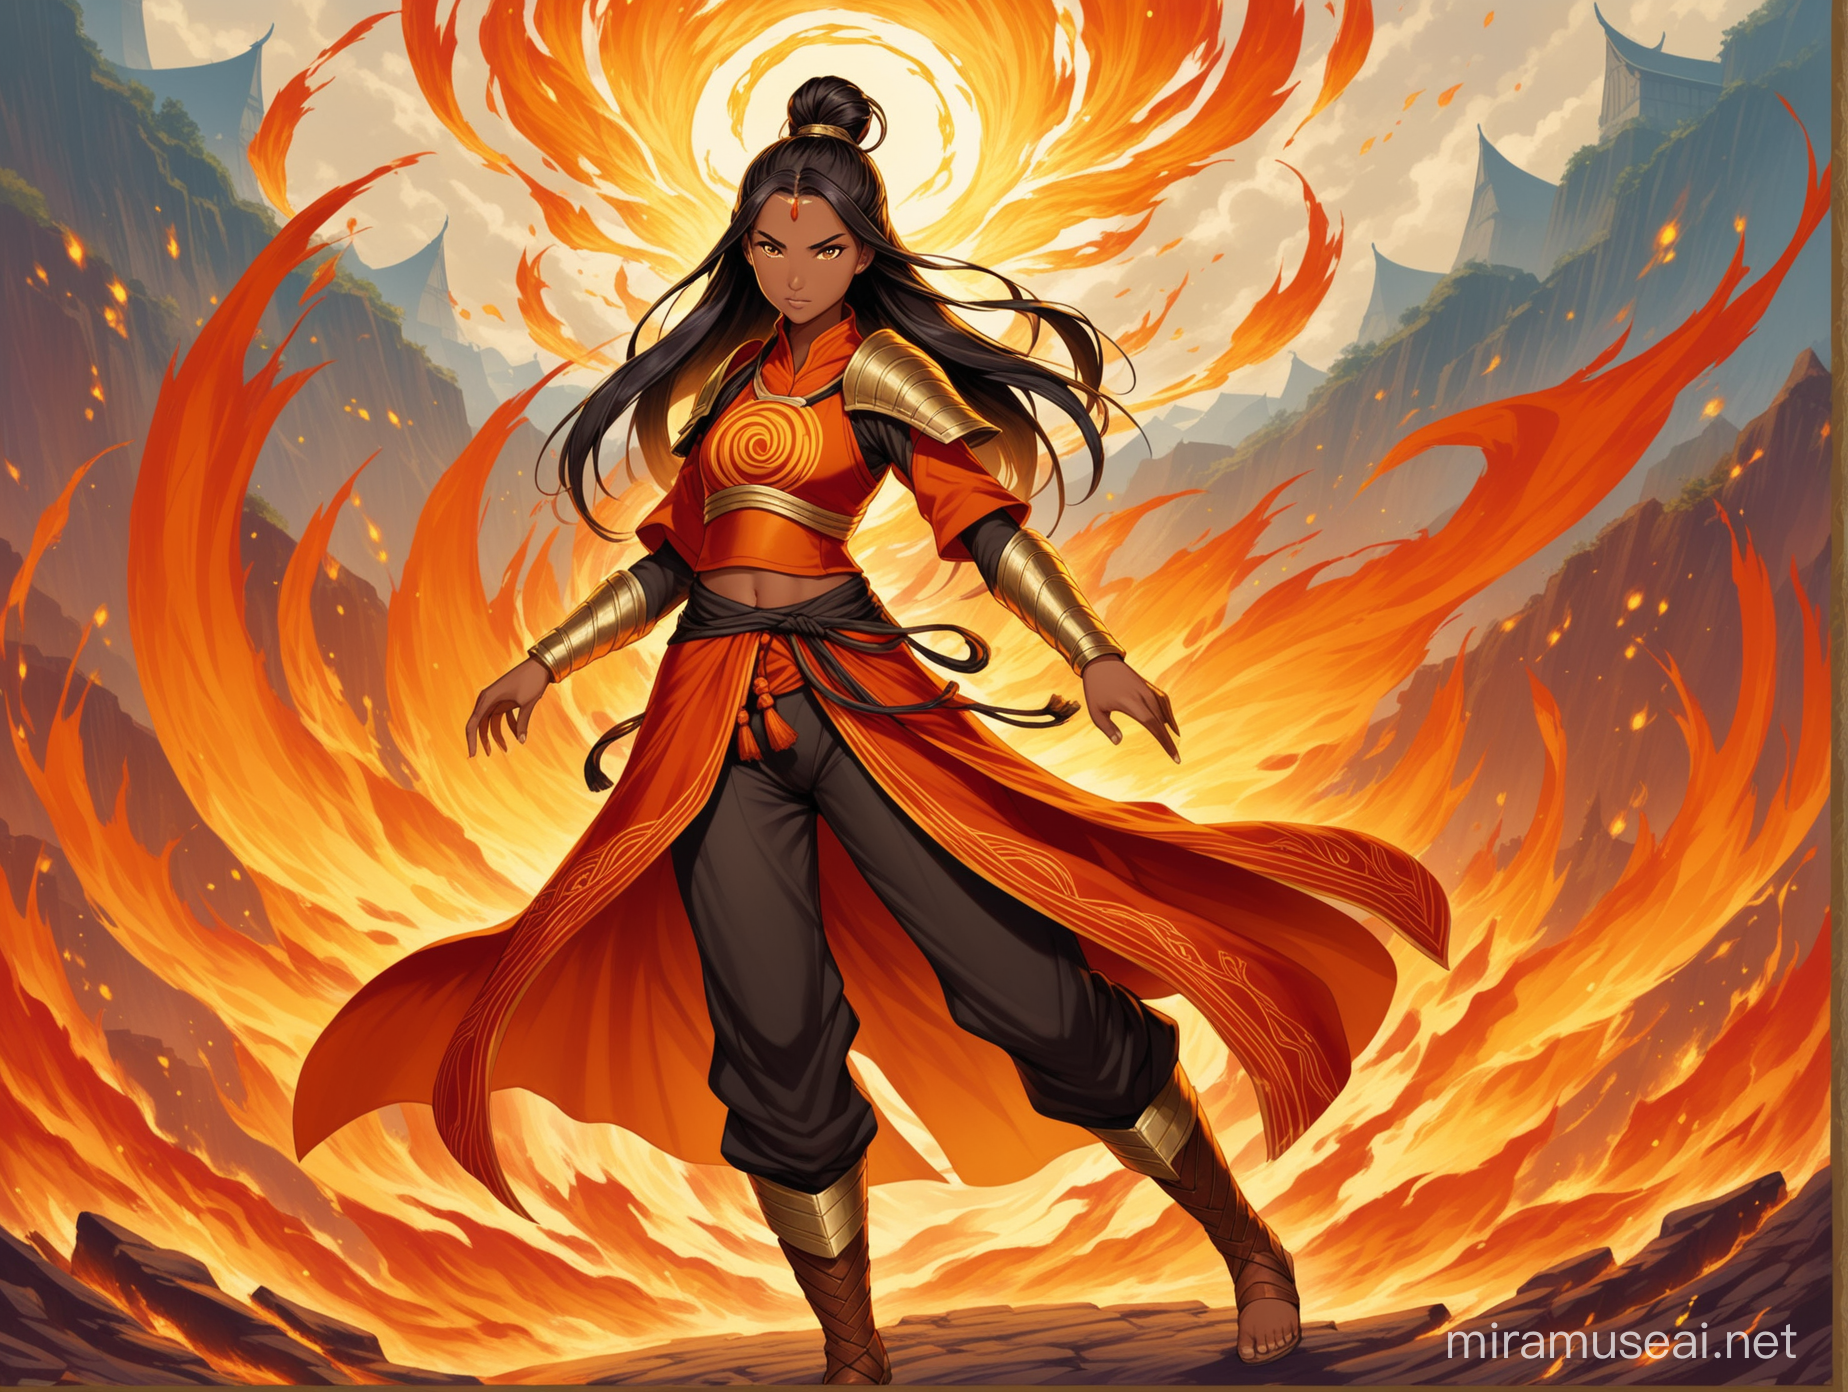 A young pretty fire nation girl, around 16 years old, with tanned brown skin, black hair in a half up hairstyle with a top knot, decorated in golden ornaments,and orange eyes.She wears lightweight silk armor adorned with golden ornaments and flame embroidery. Loose-fitting pants allow for agility. Half-boots with fabric wrappings complete her look. The style is reminiscent of classic fantasy art, with a character concept emphasizing chaos.